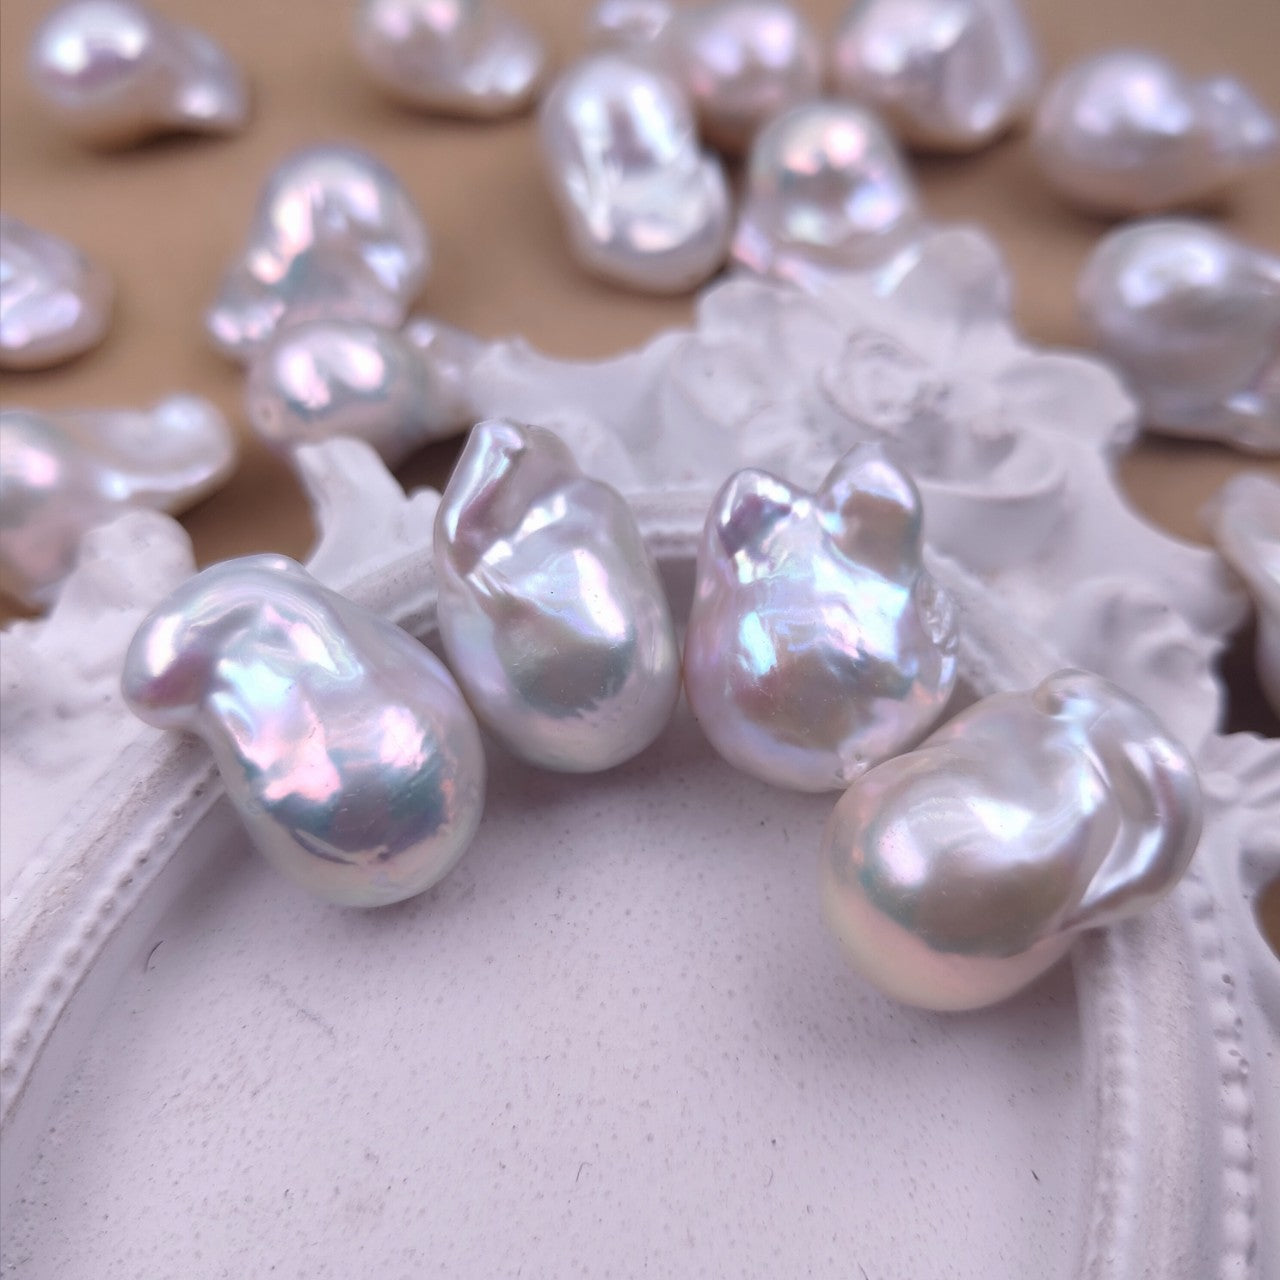 Natural Baroque pearls with peculiar shapes wholesale